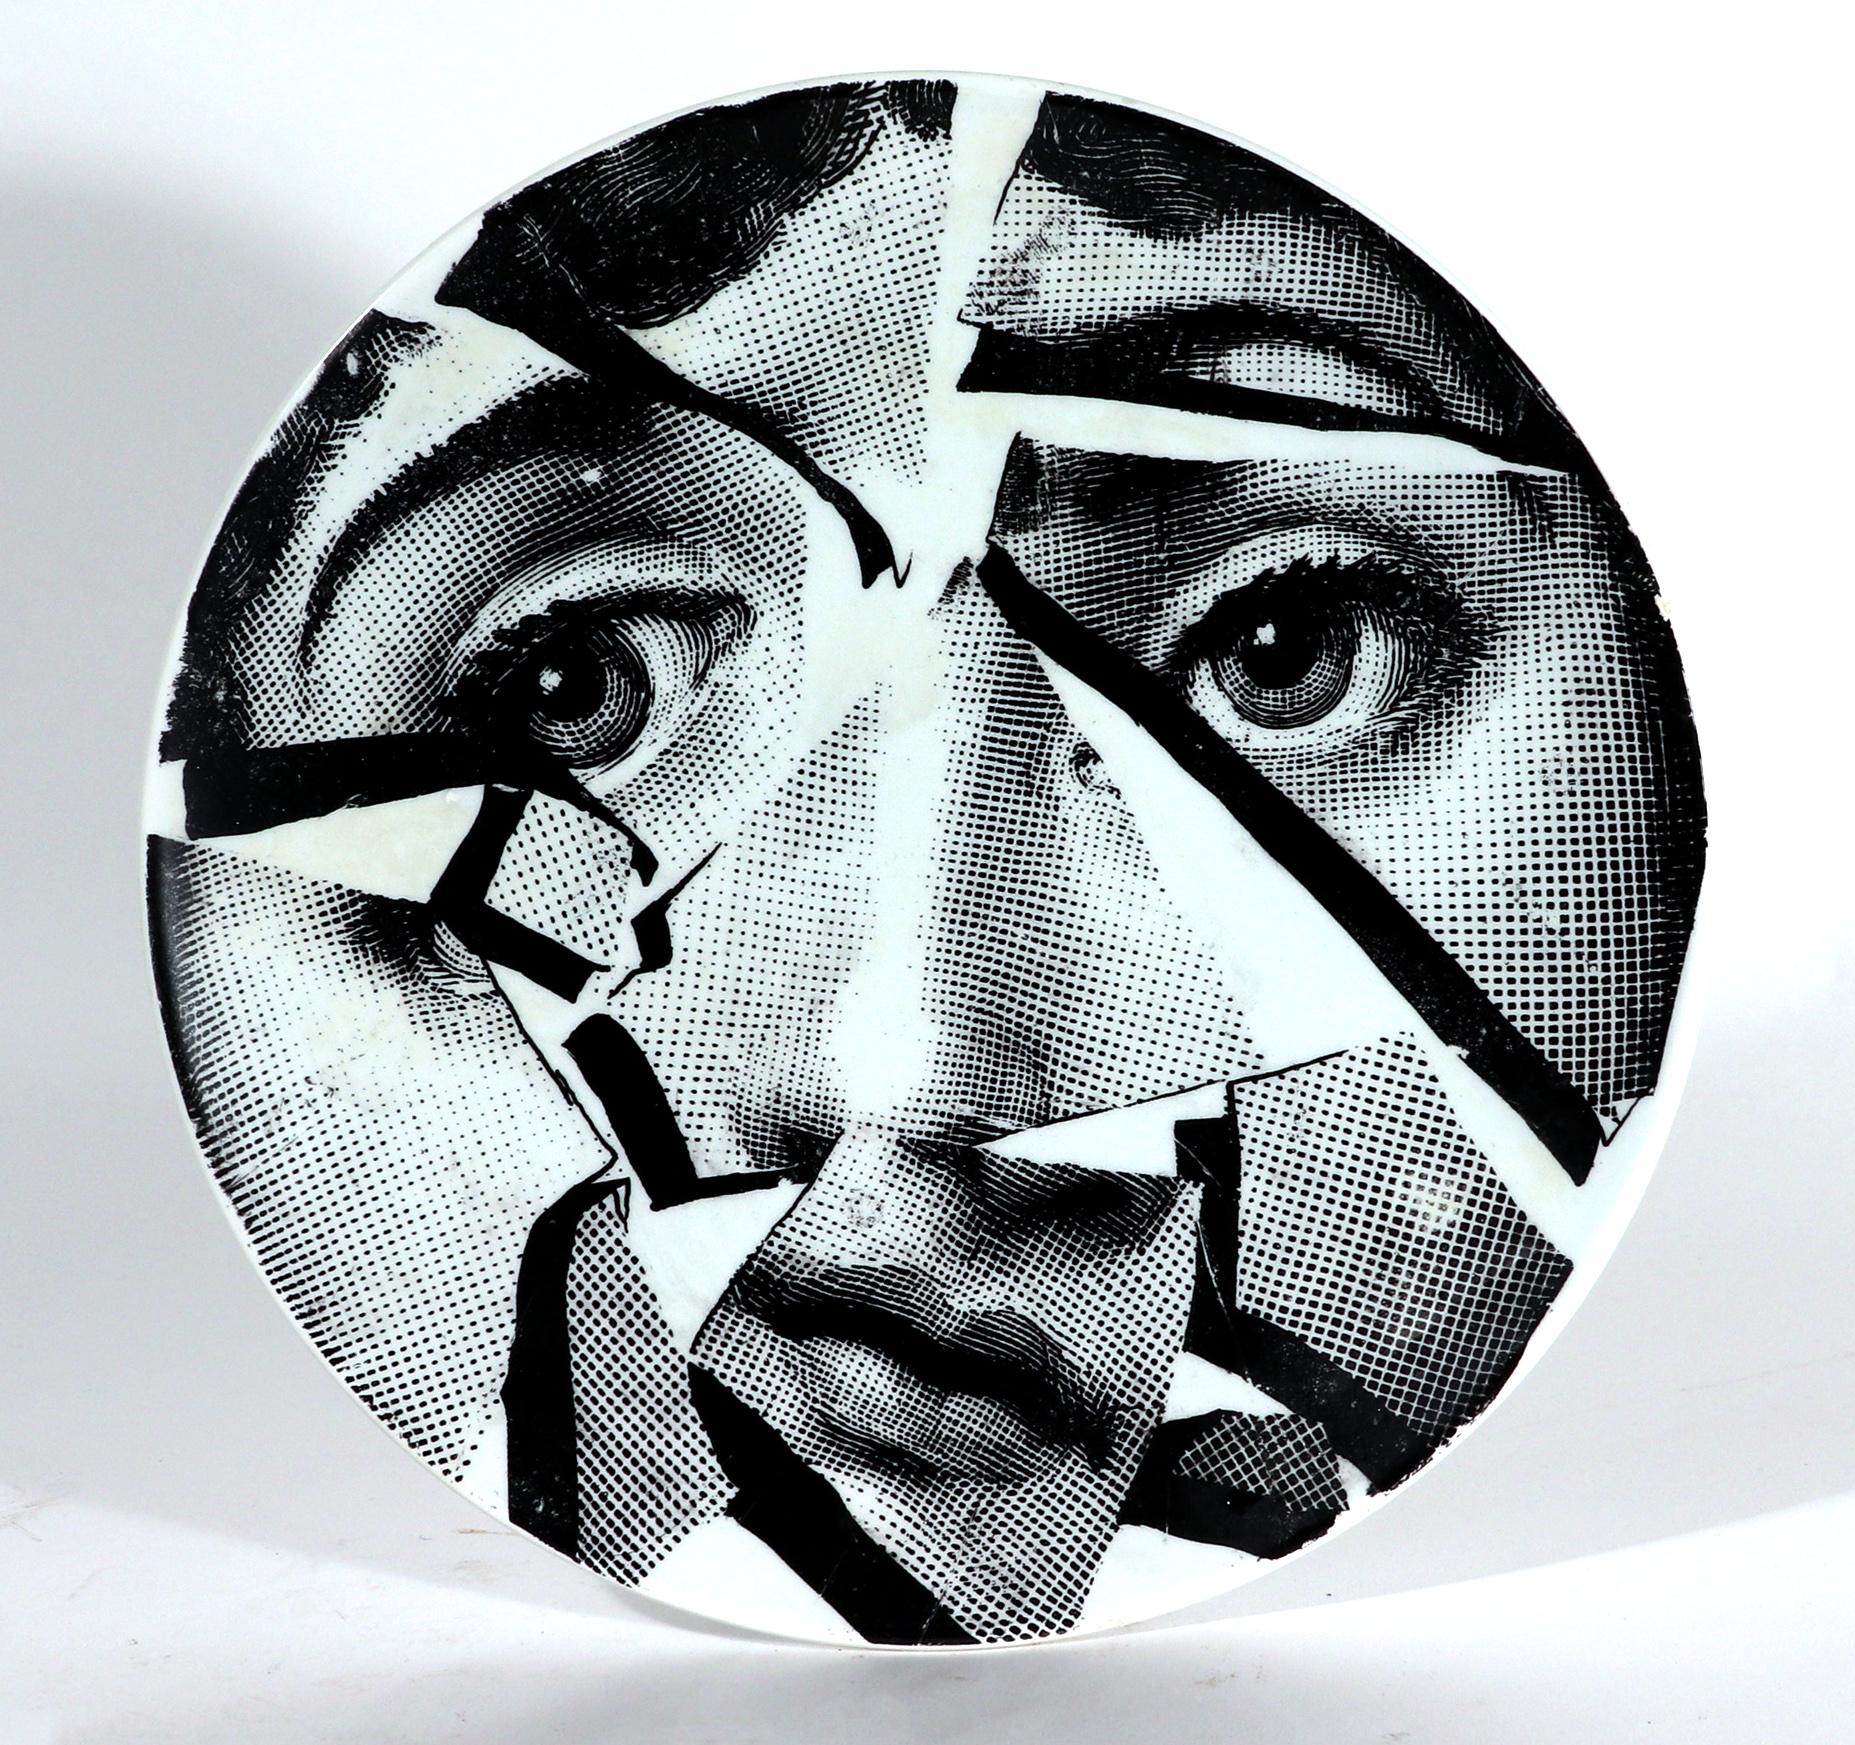 Piero Fornasetti Pottery Surrealist Themes & Variation plate, Shattered Face,
Circa 1952

This is a rare very early example of the Fornasetti Themes & Variation pattern on a pottery body. It is so early that it does not have the pattern number on